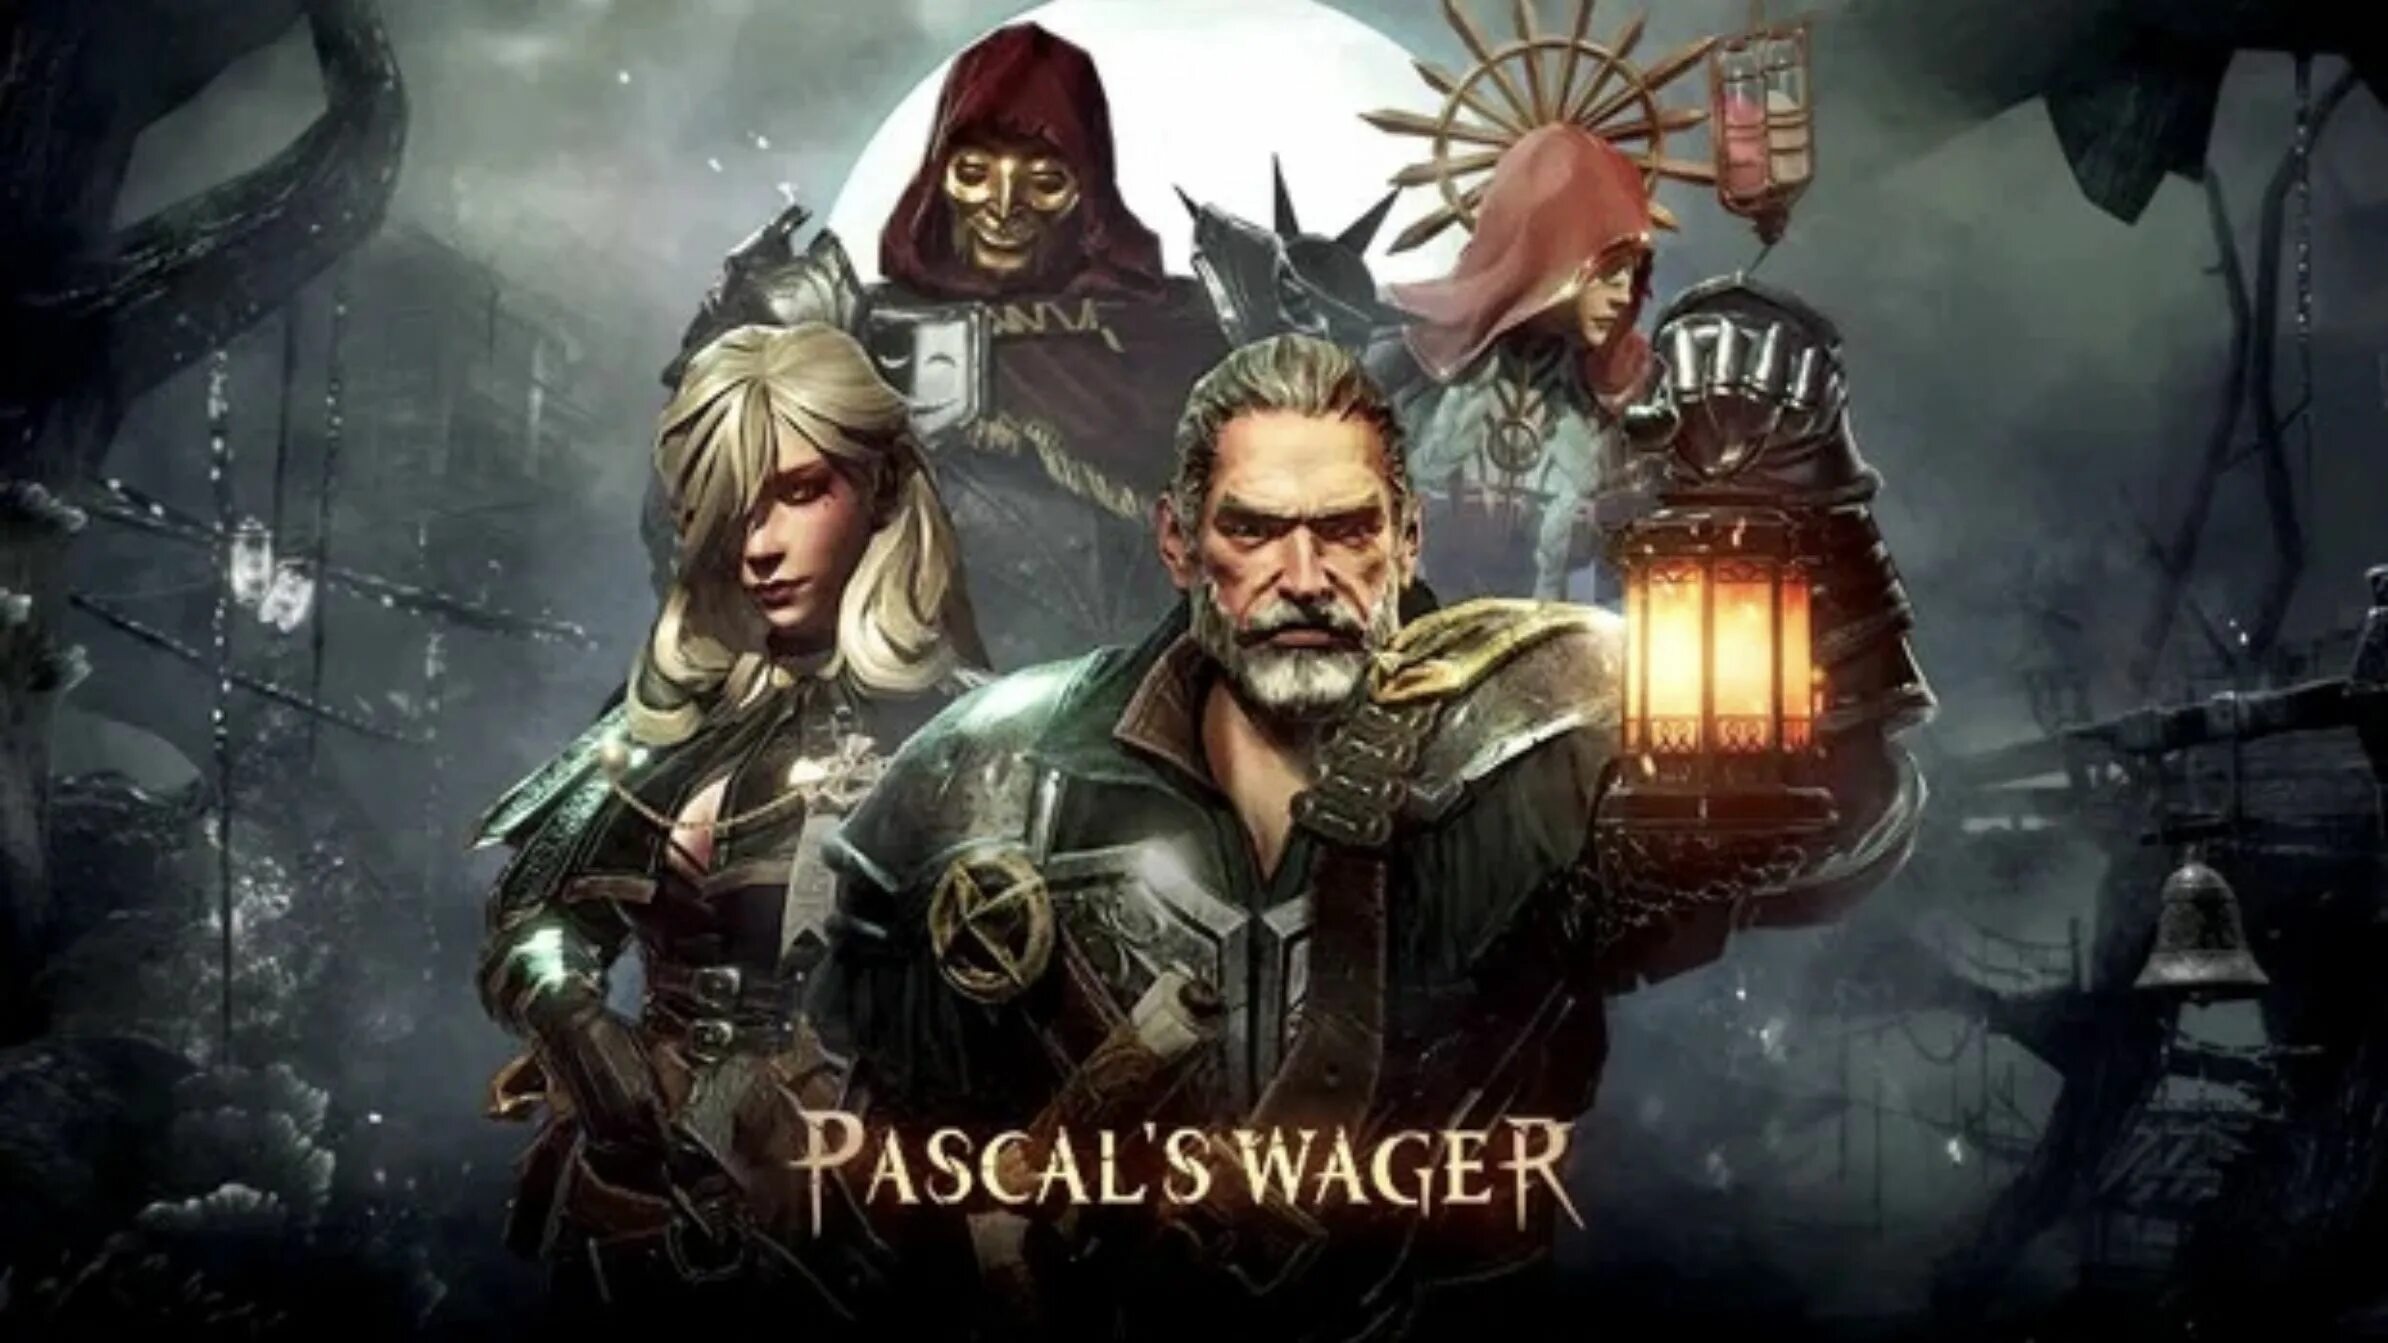 Pascal's Wager: Definitive Edition. Pascal Wager Android. Pascal's Wager на ПК. Pascal's Wager Definitive Edition Нинтендо. Pascals wager definitive edition